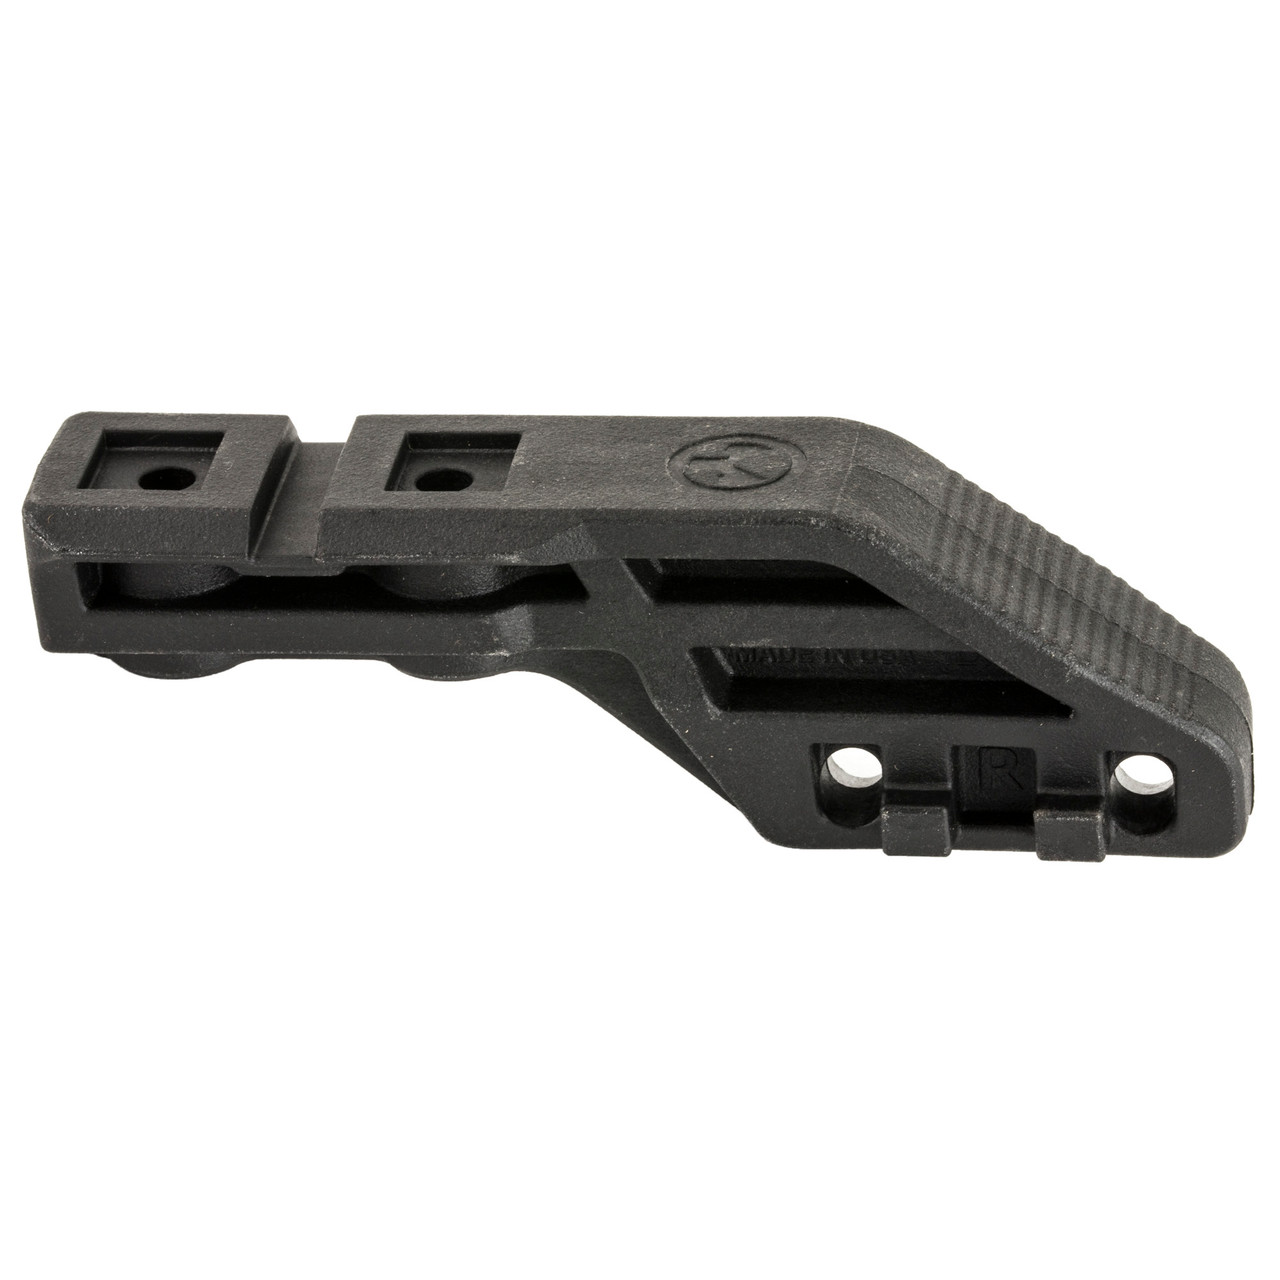 Magpul Industries MAG403-BLK-RT Moe Scout Mount Right Blk